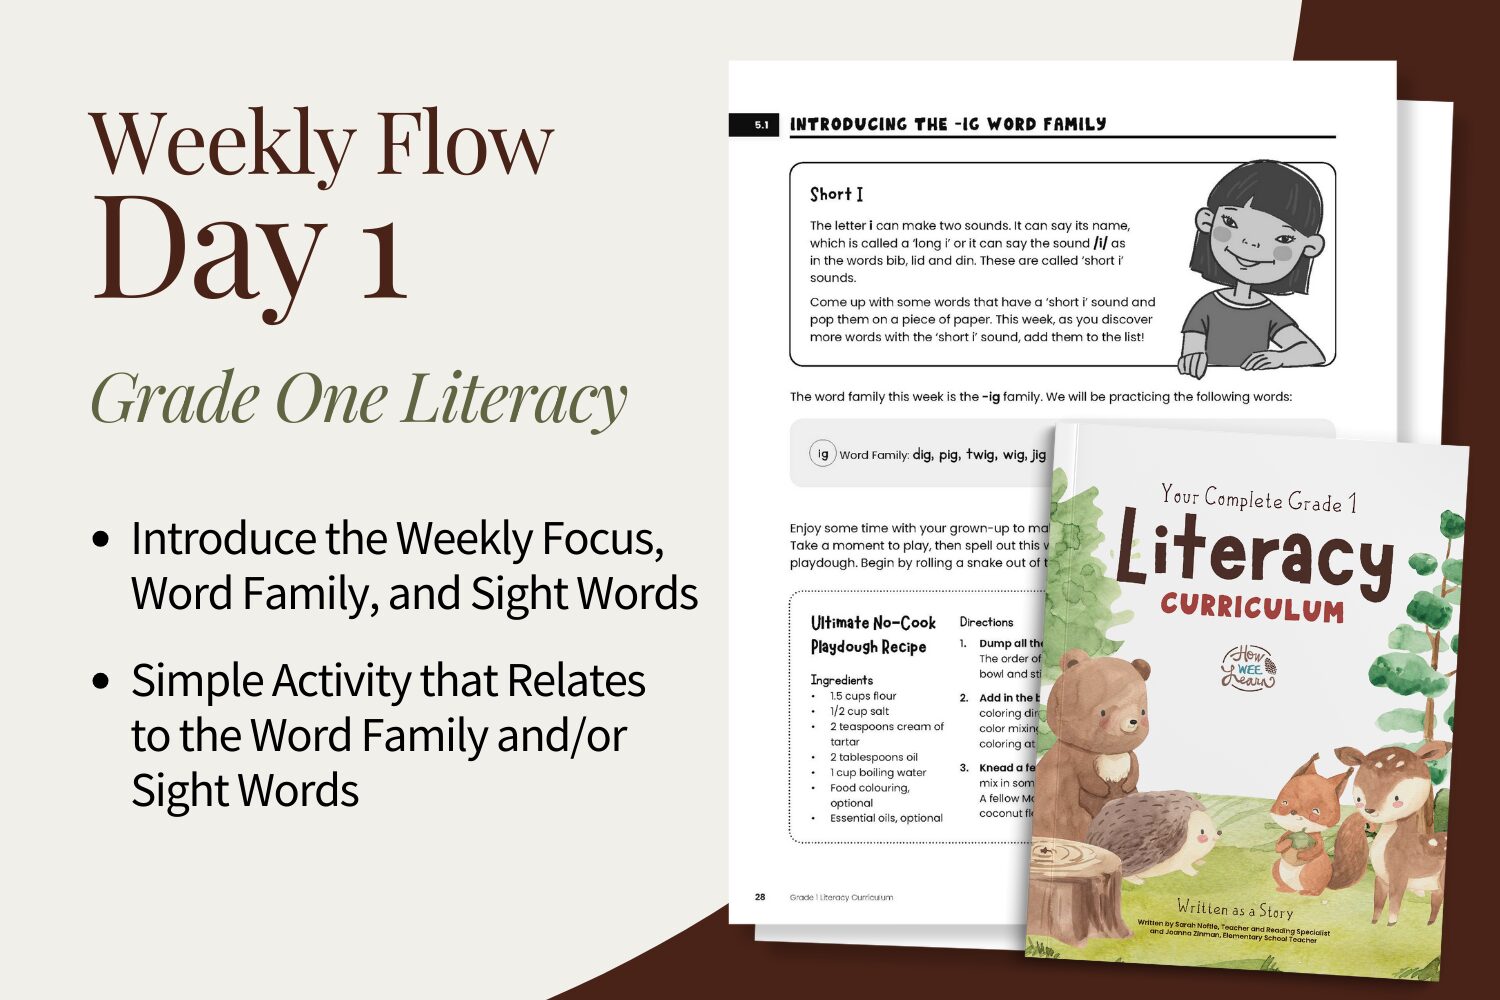 Grade One Literacy: Weekly Flow, Day 1 - Introduce the Weekly Focus, Word Family, and Sight Words - Simple Activity that Relates to the Word Family and/or Sight Words